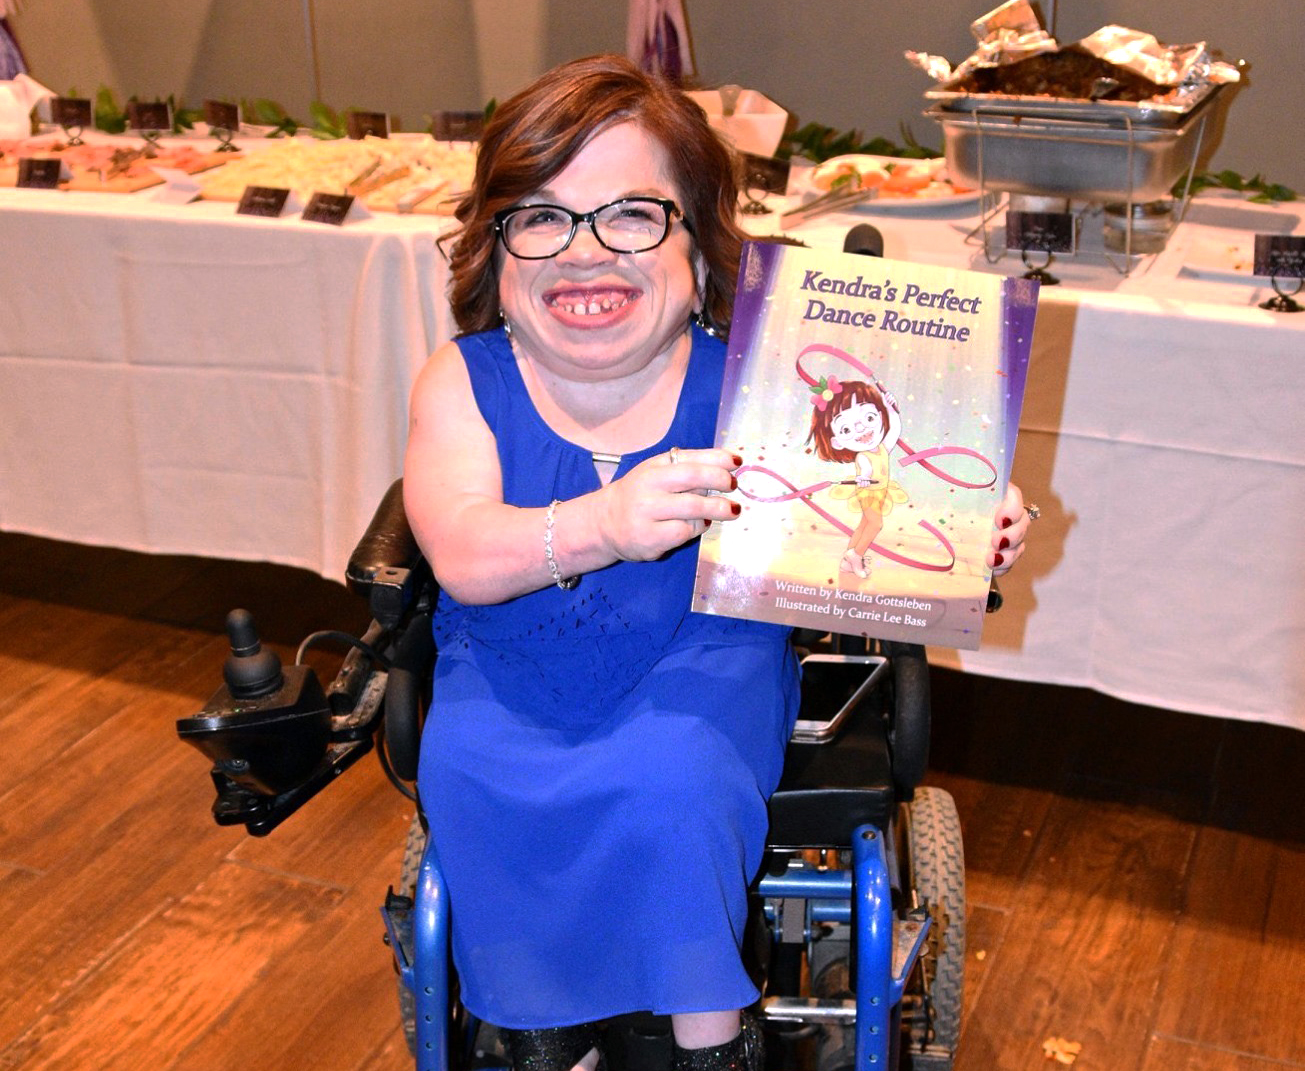 Making lemonade: USD Center for Disabilities marketing specialist publishes children’s book